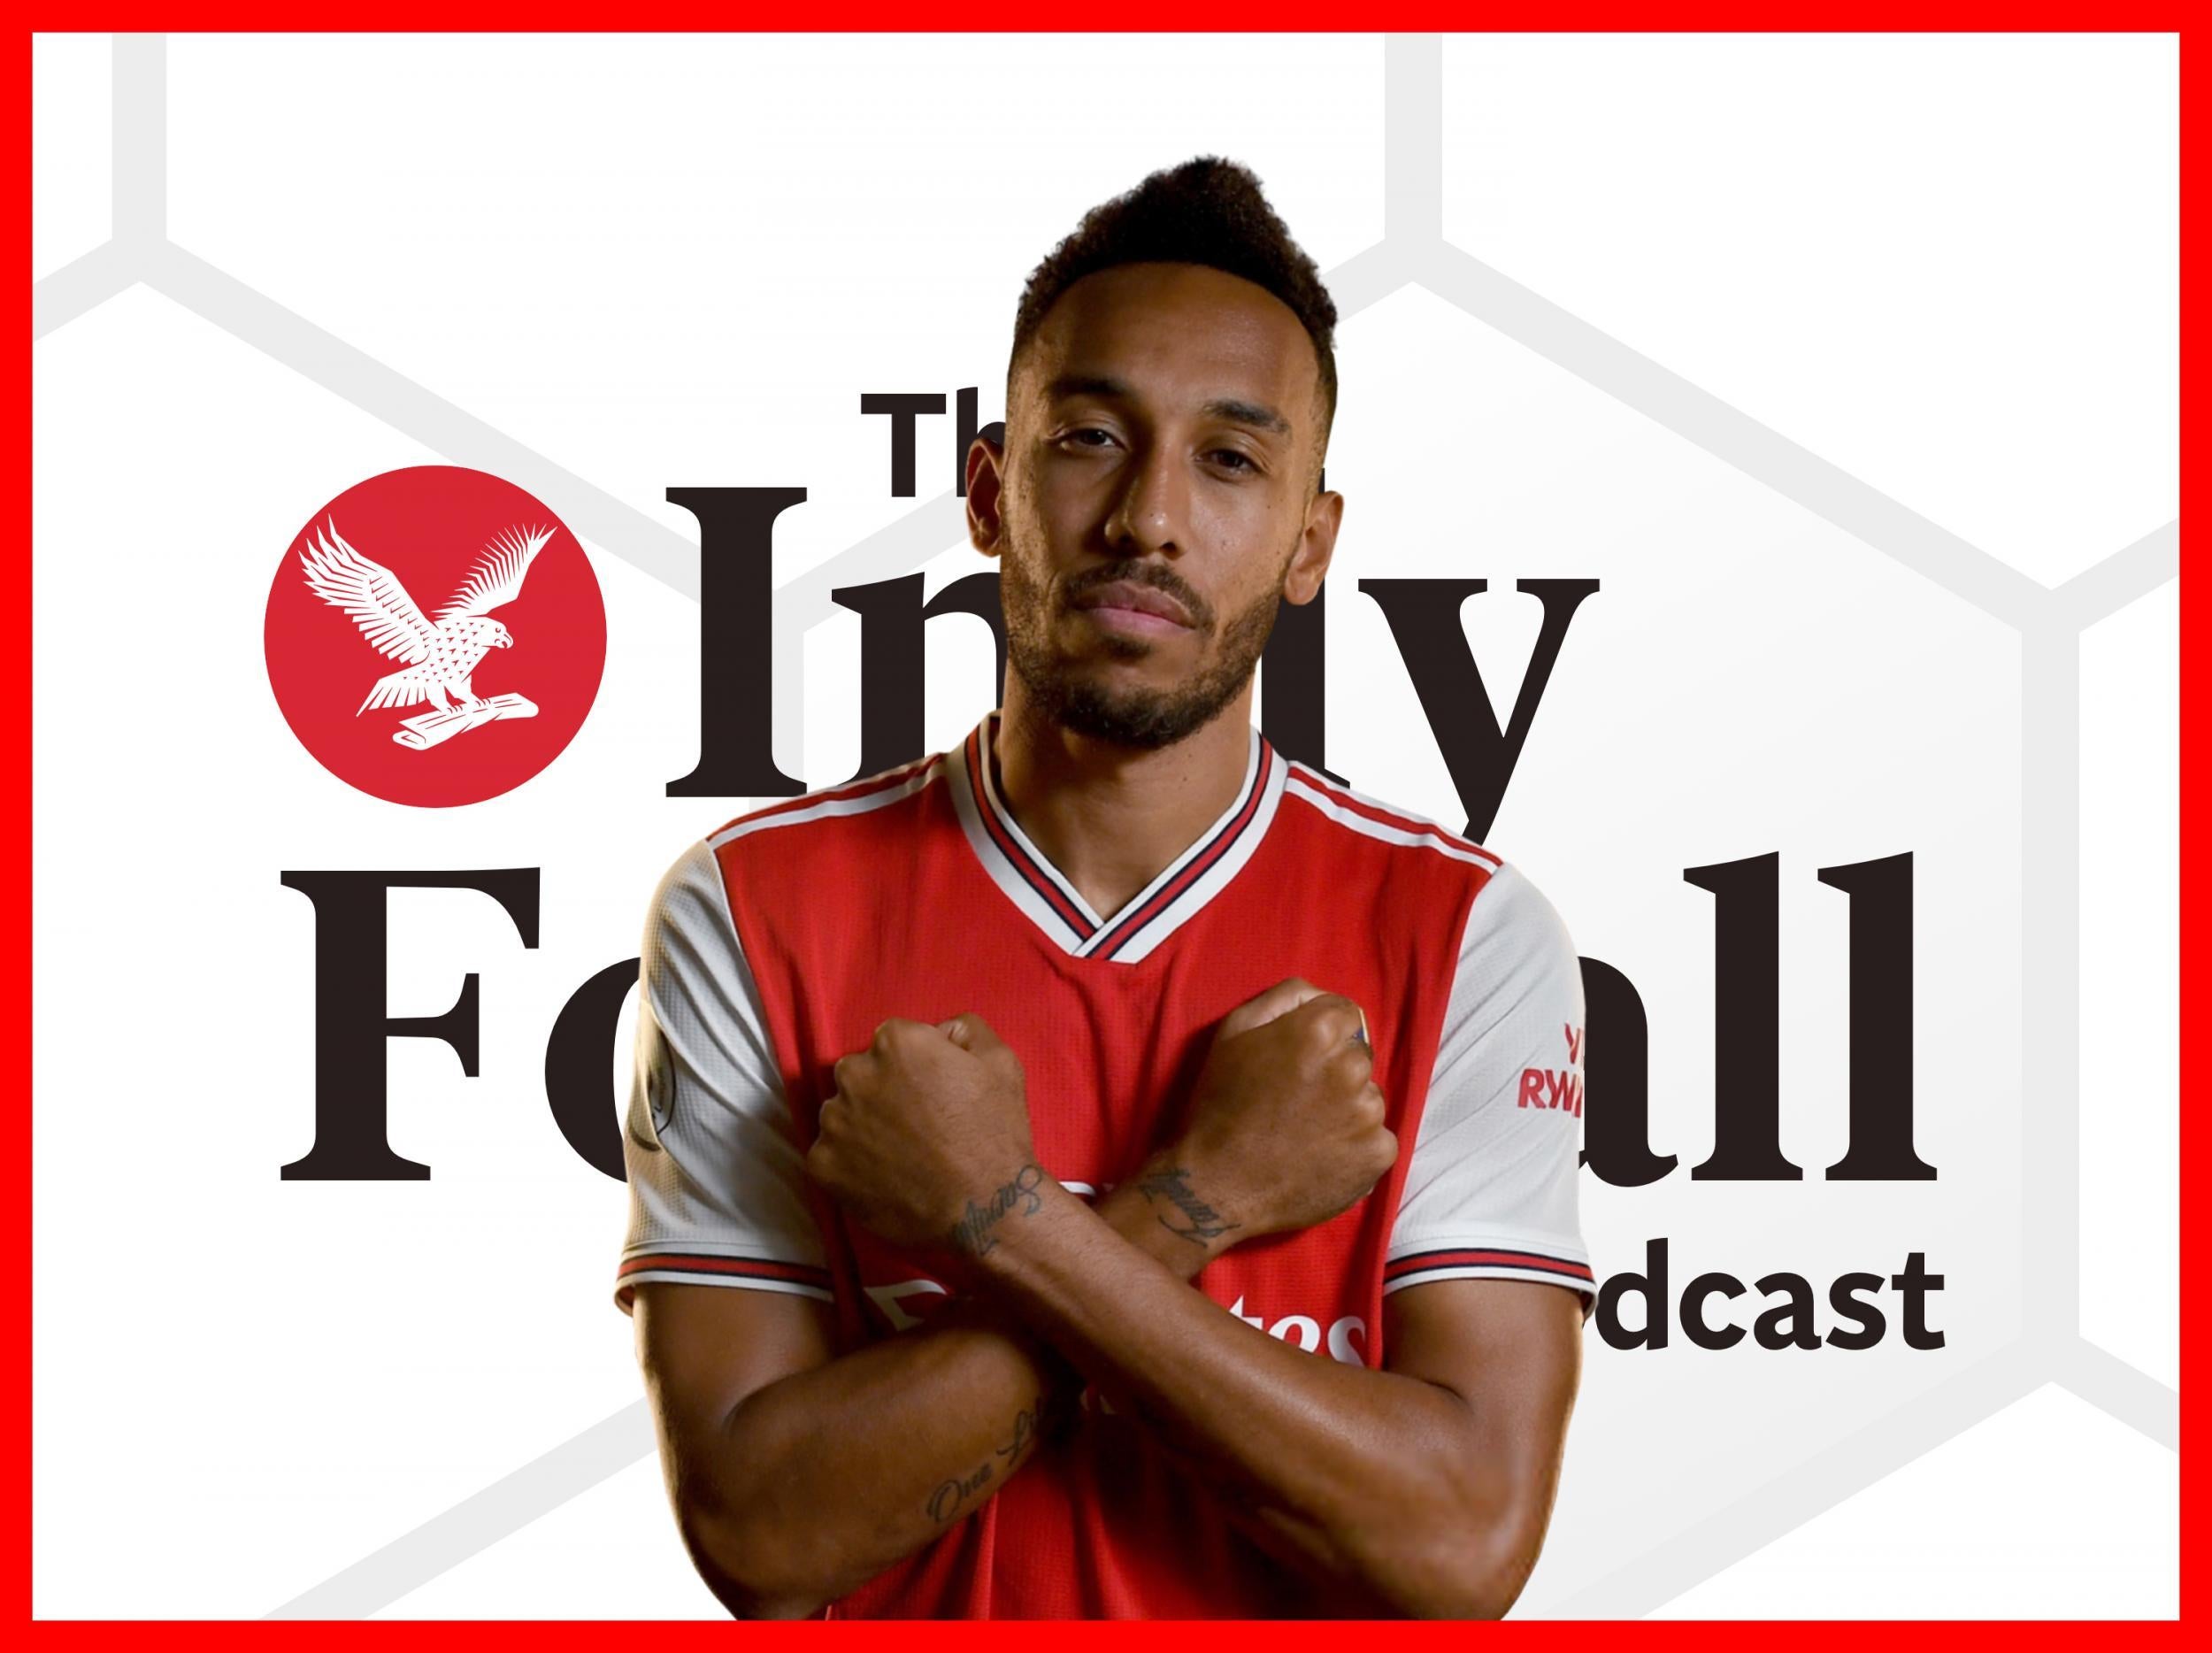 Download the latest episode of the pod